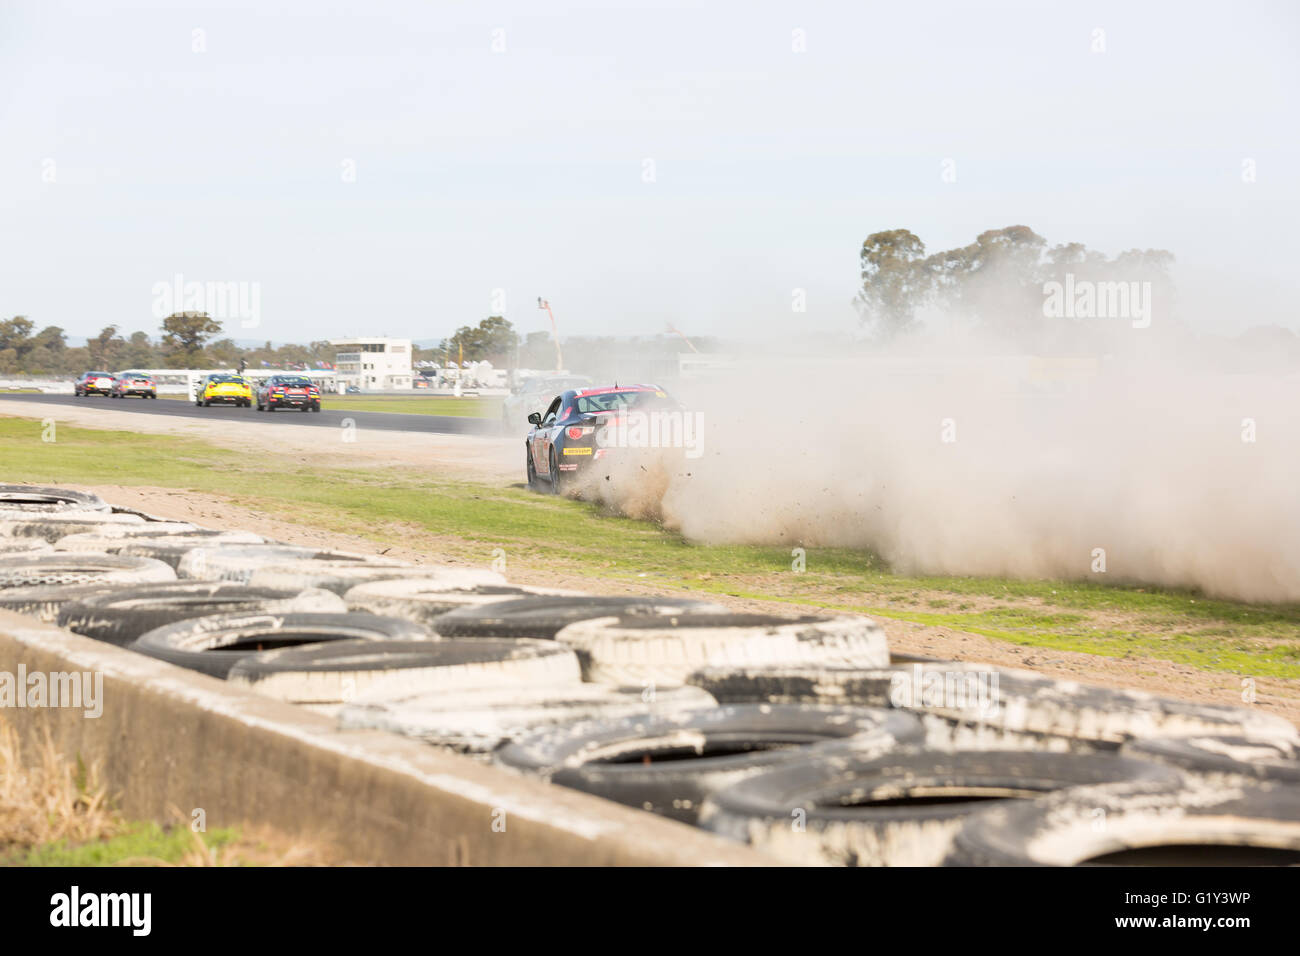 MELBOURNE, WINTON/AUSTRALIA, 20 MAY, 2016: Toyota 86 Racing Series fires up for its Winton debut. Credit:  David Hewison/Alamy Live News Stock Photo